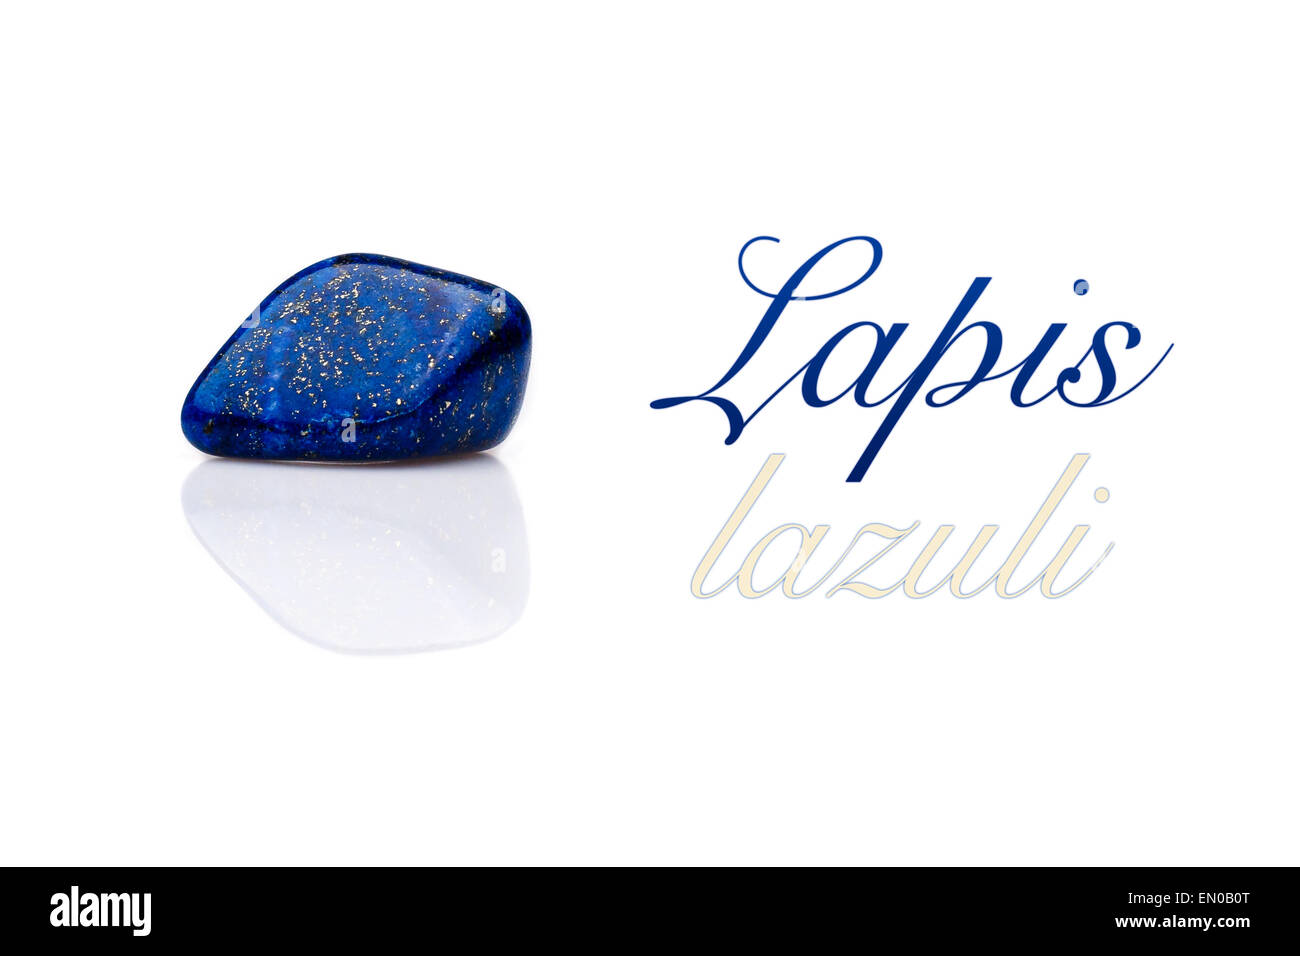 Beautiful blue lapis lazuli gem stone. With text in blue and gold. Isolated on white background. Found in Afghanistan. Stock Photo